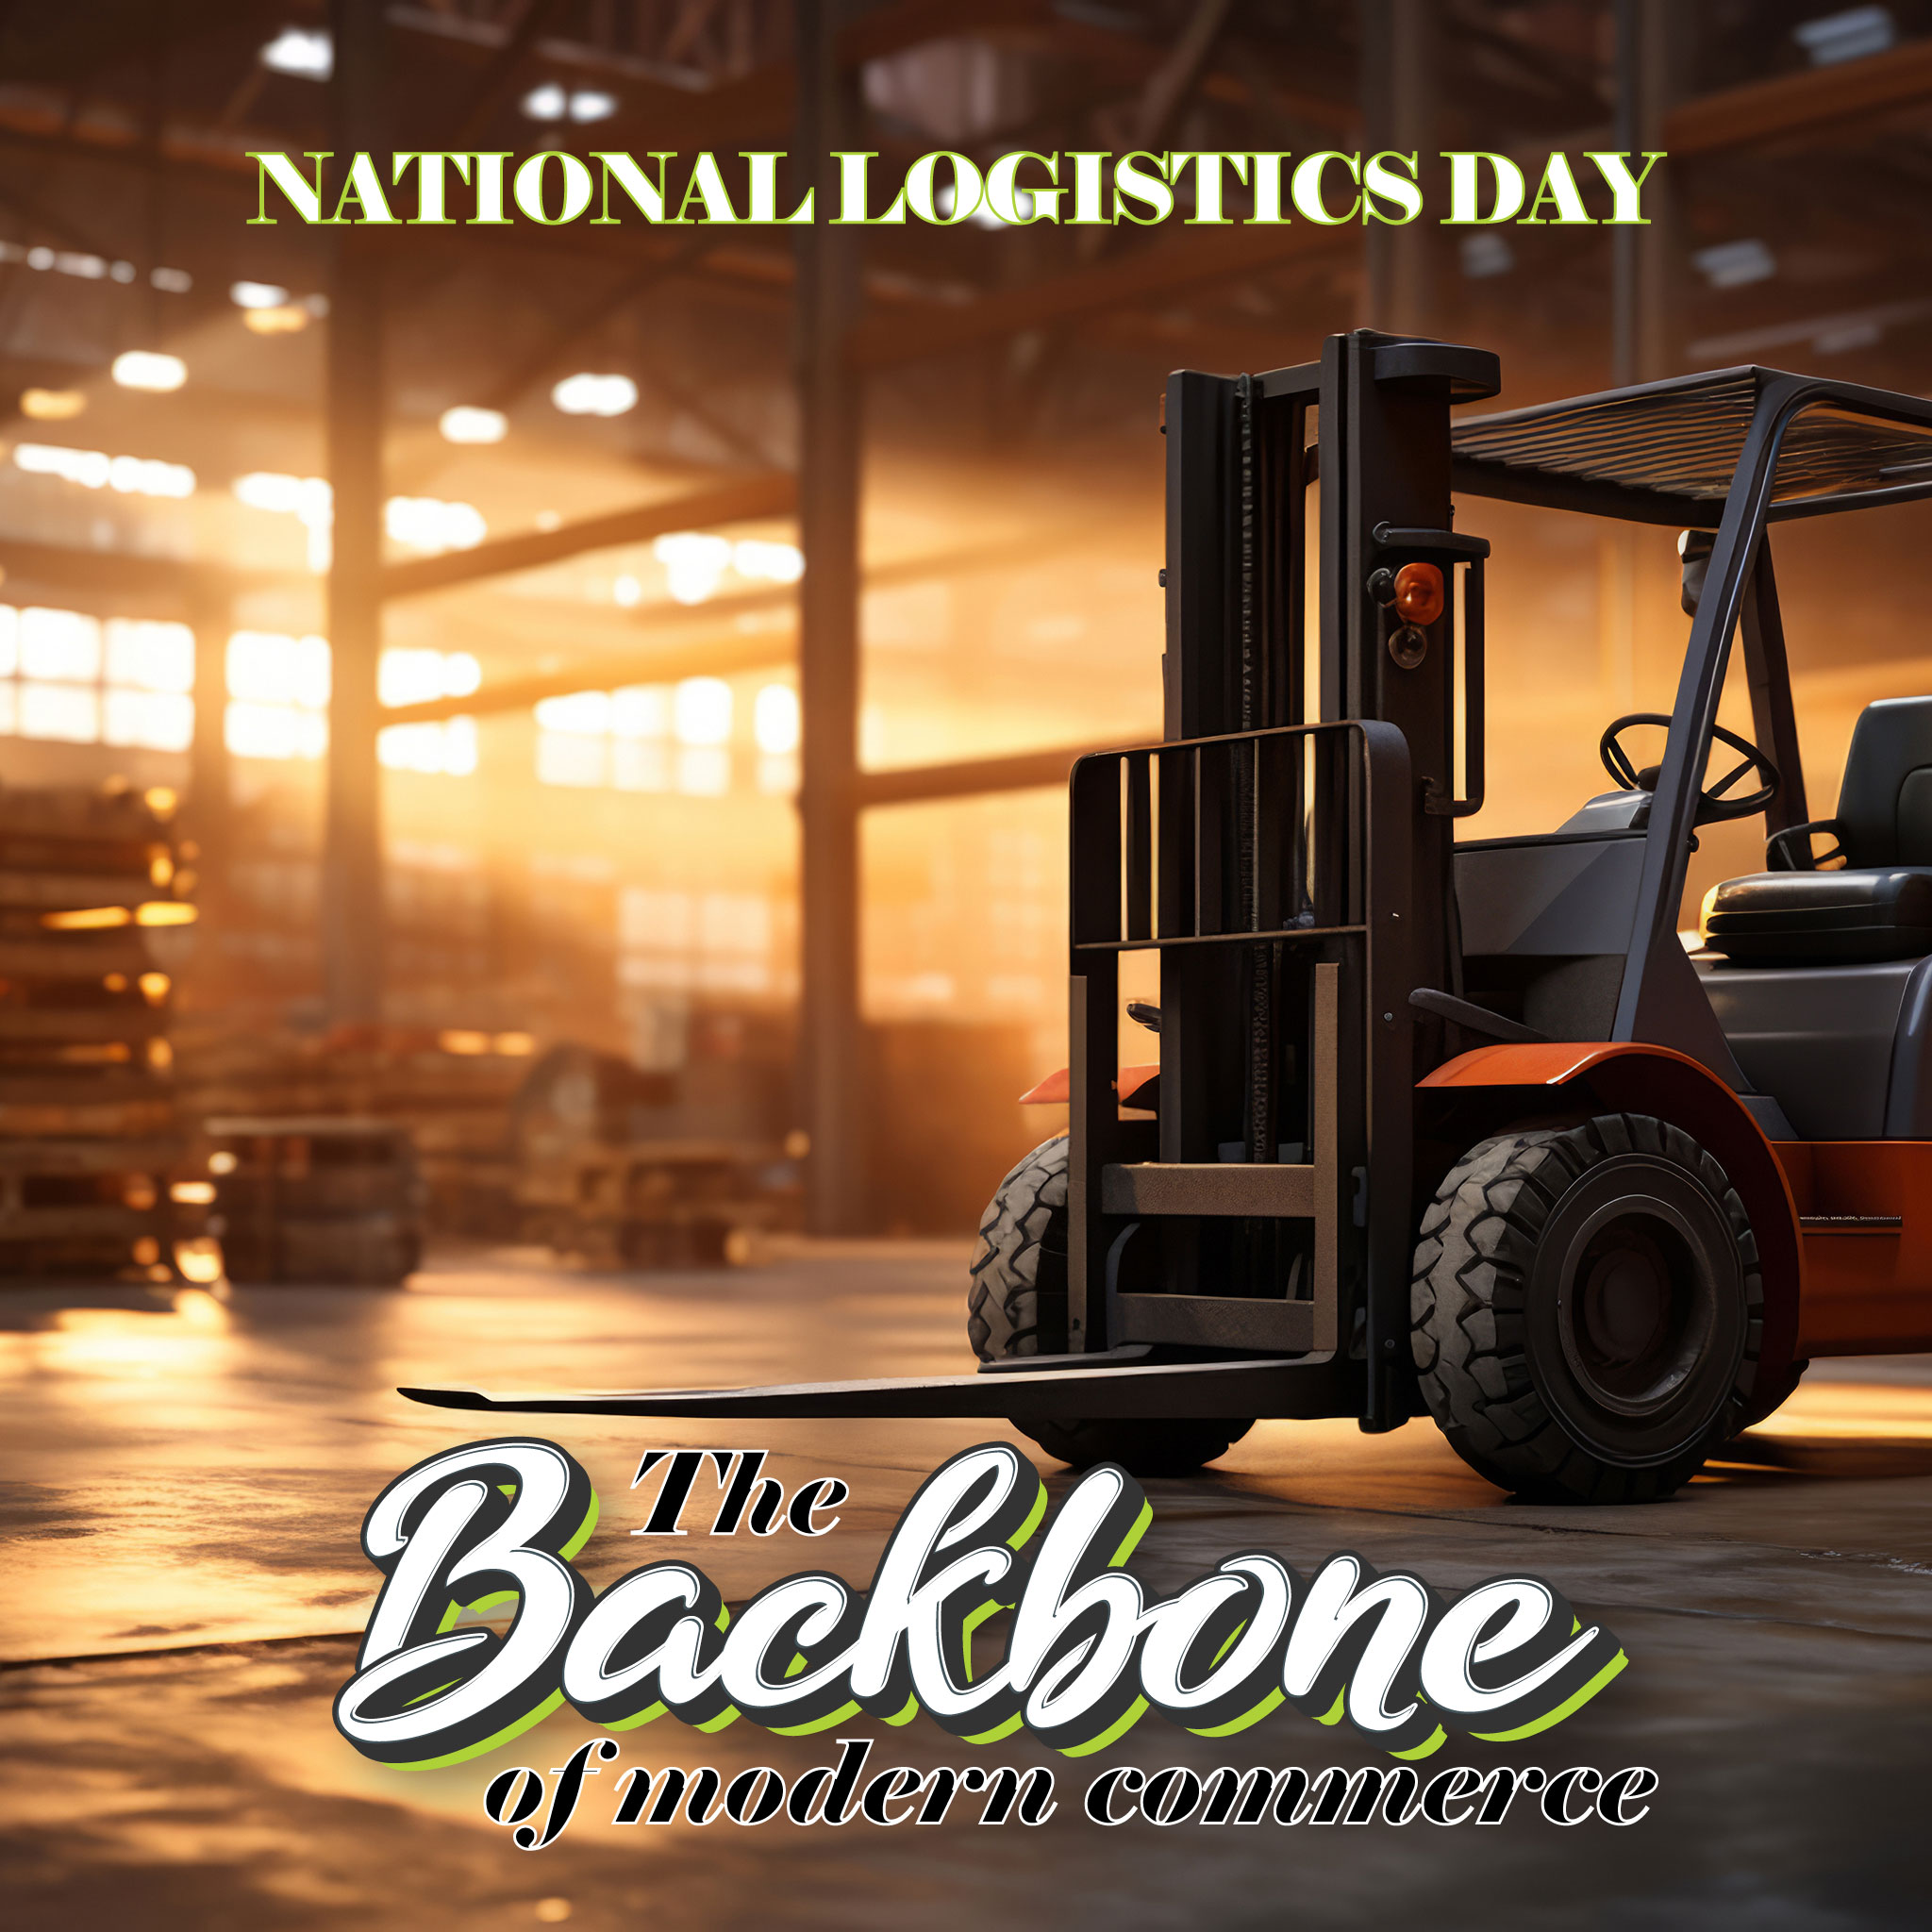 Every year on June 28th, we celebrate National Logistics Day, a day dedicated to recognizing the vital role that logistics plays in our daily lives and the global economy. From ensuring the smooth transportation of goods to managing complex supply chains, the logistics industry is the backbone of modern commerce, enabling businesses to operate efficiently and customers to receive their products on time.